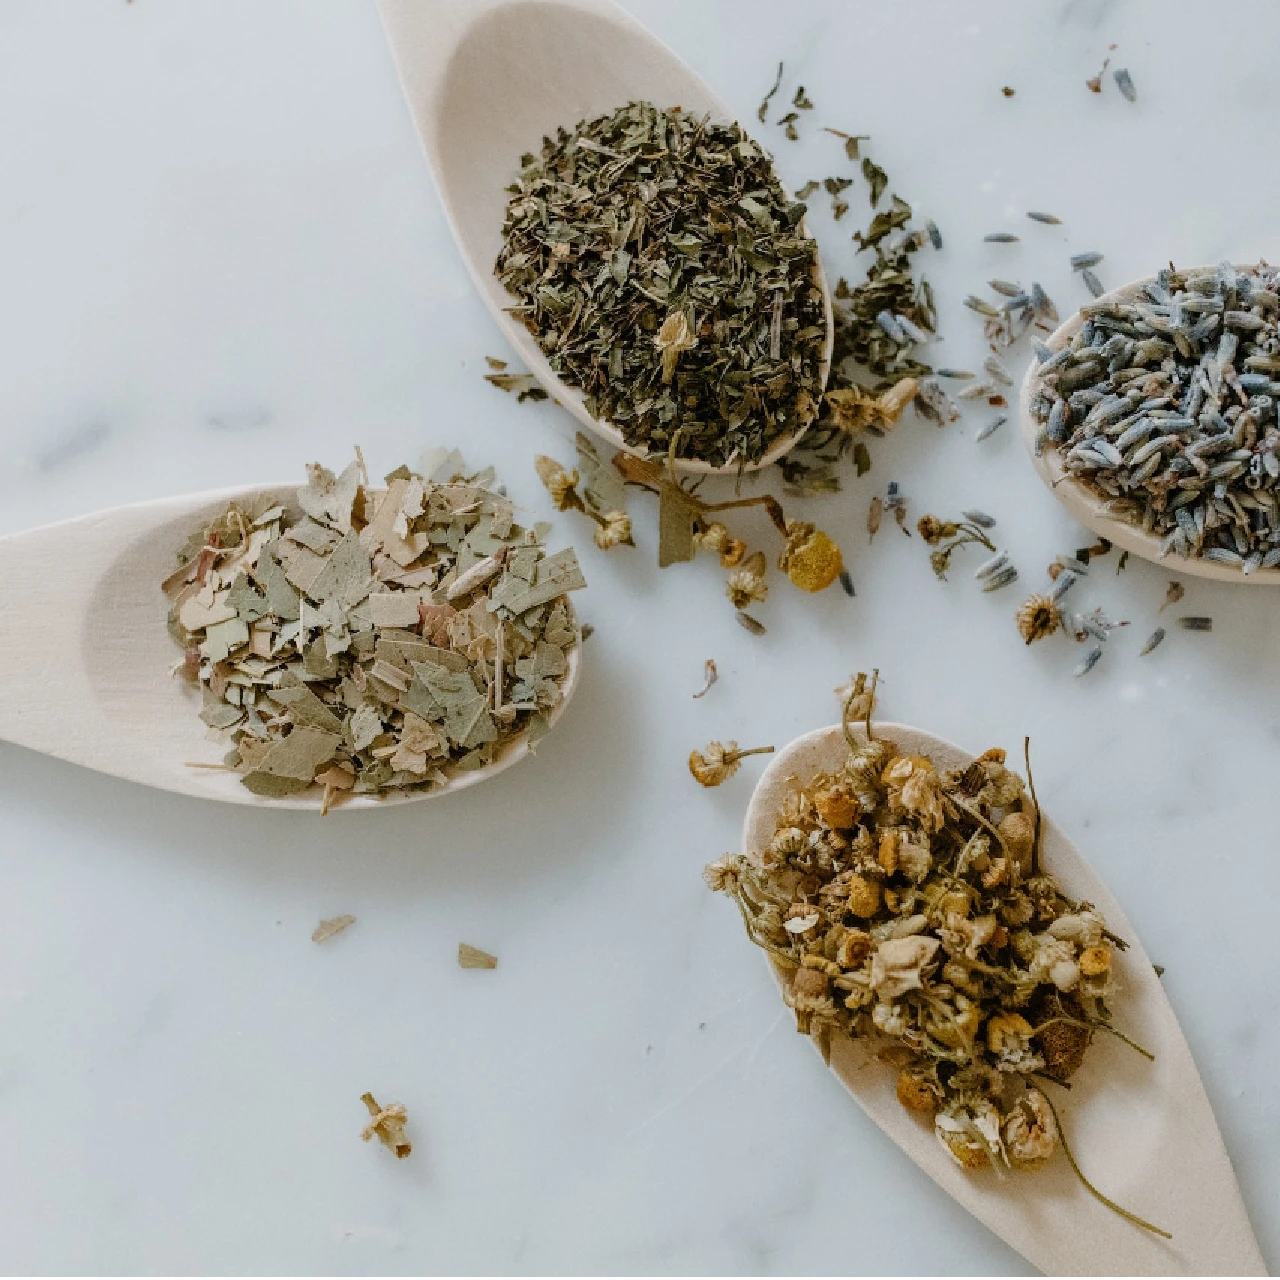 Incorporating Herbal Remedies Into Your Beauty Routine